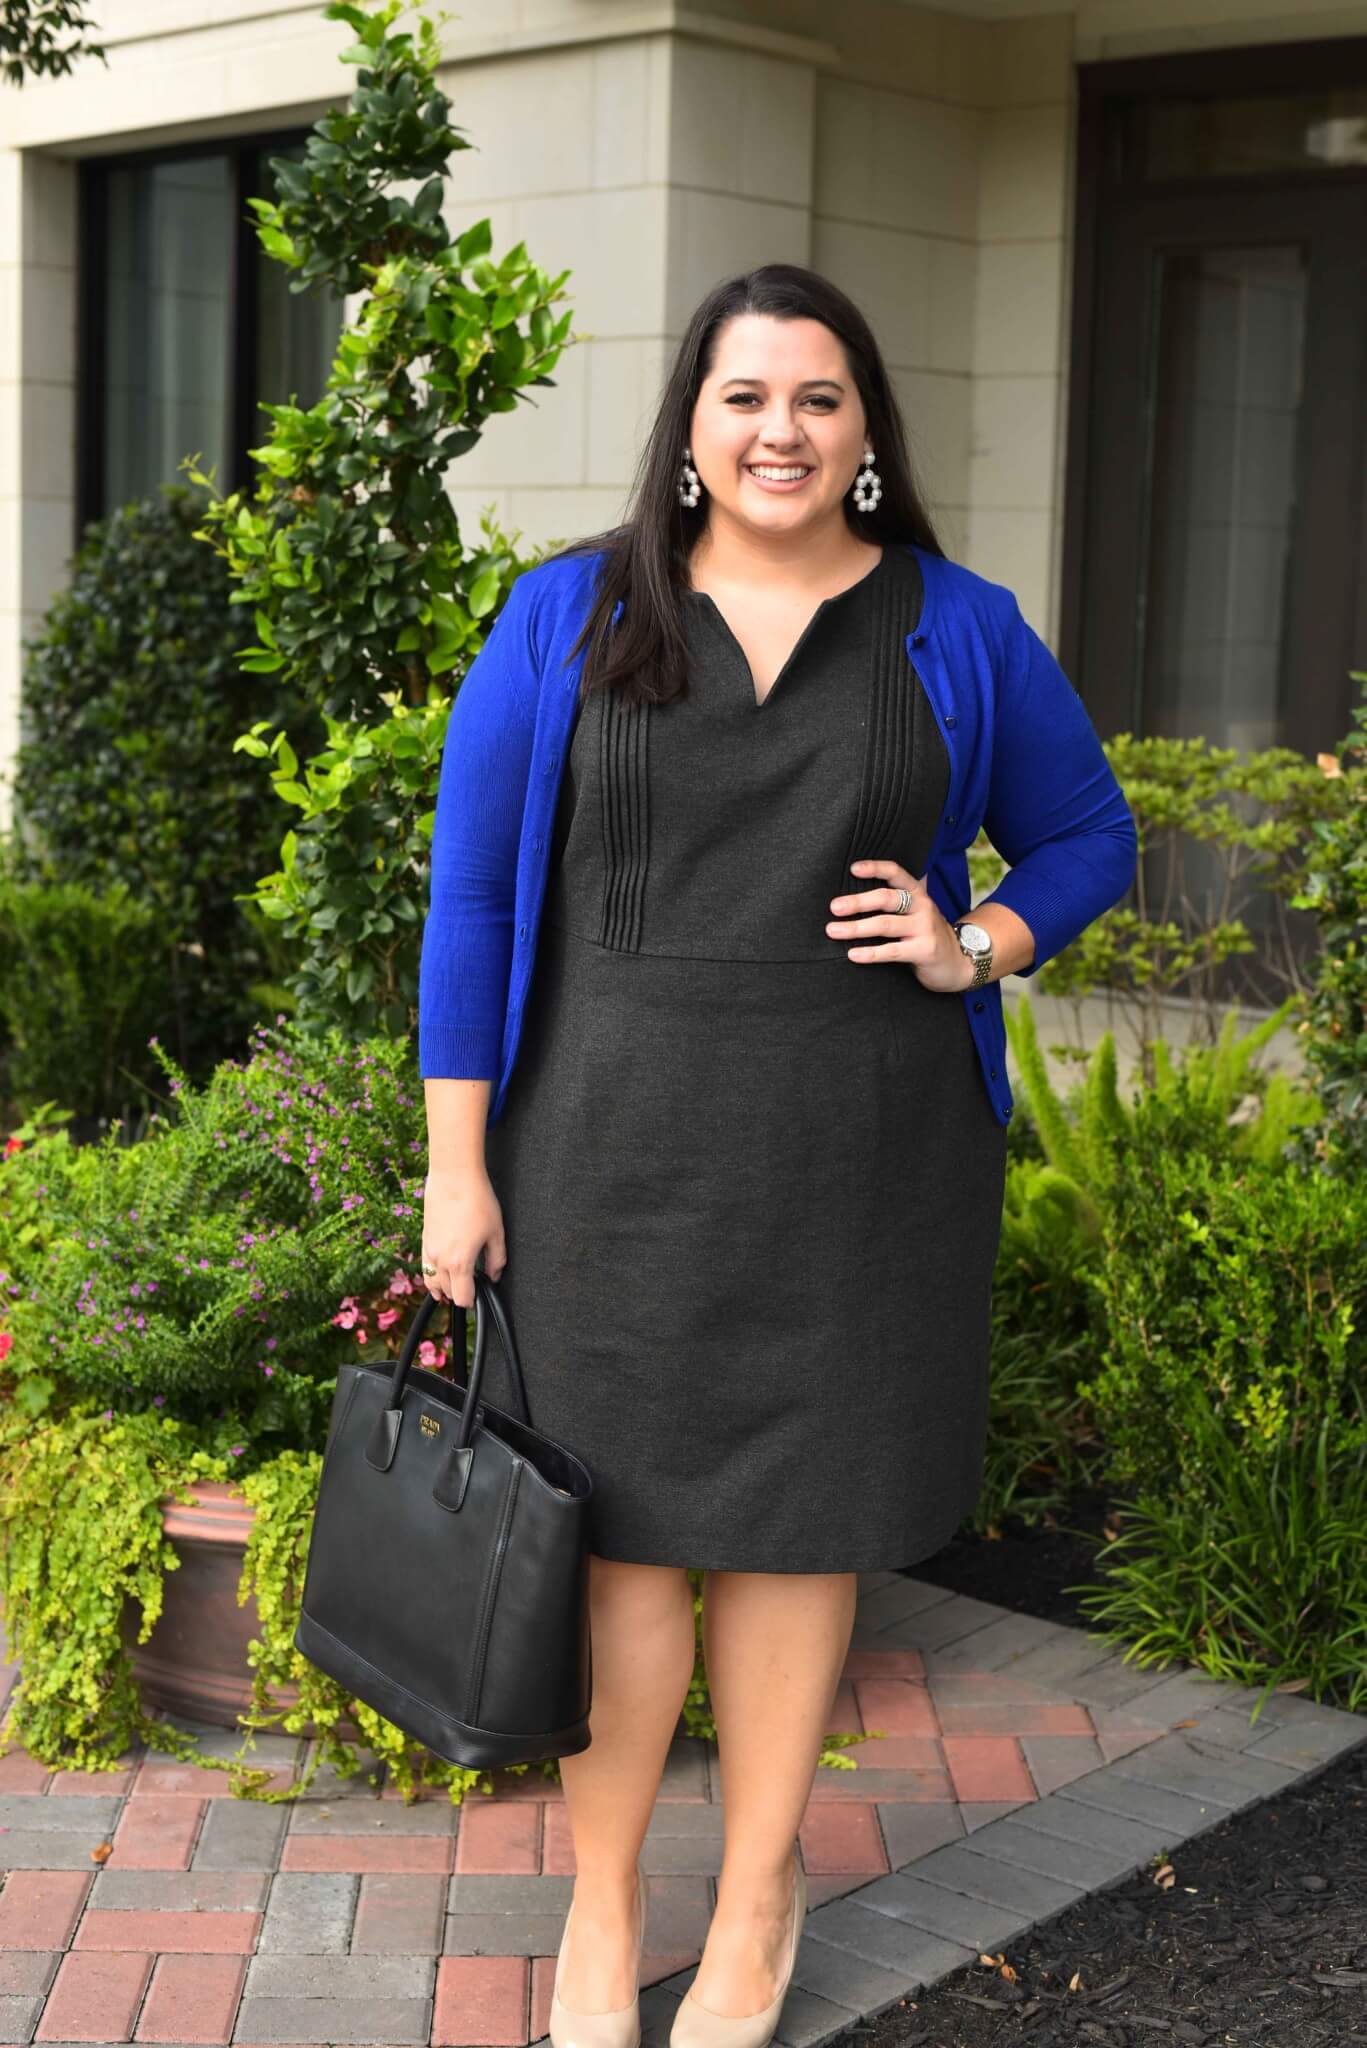 An Honest Review Of Gwynnie Bee's Plus Size Clothing Subscription